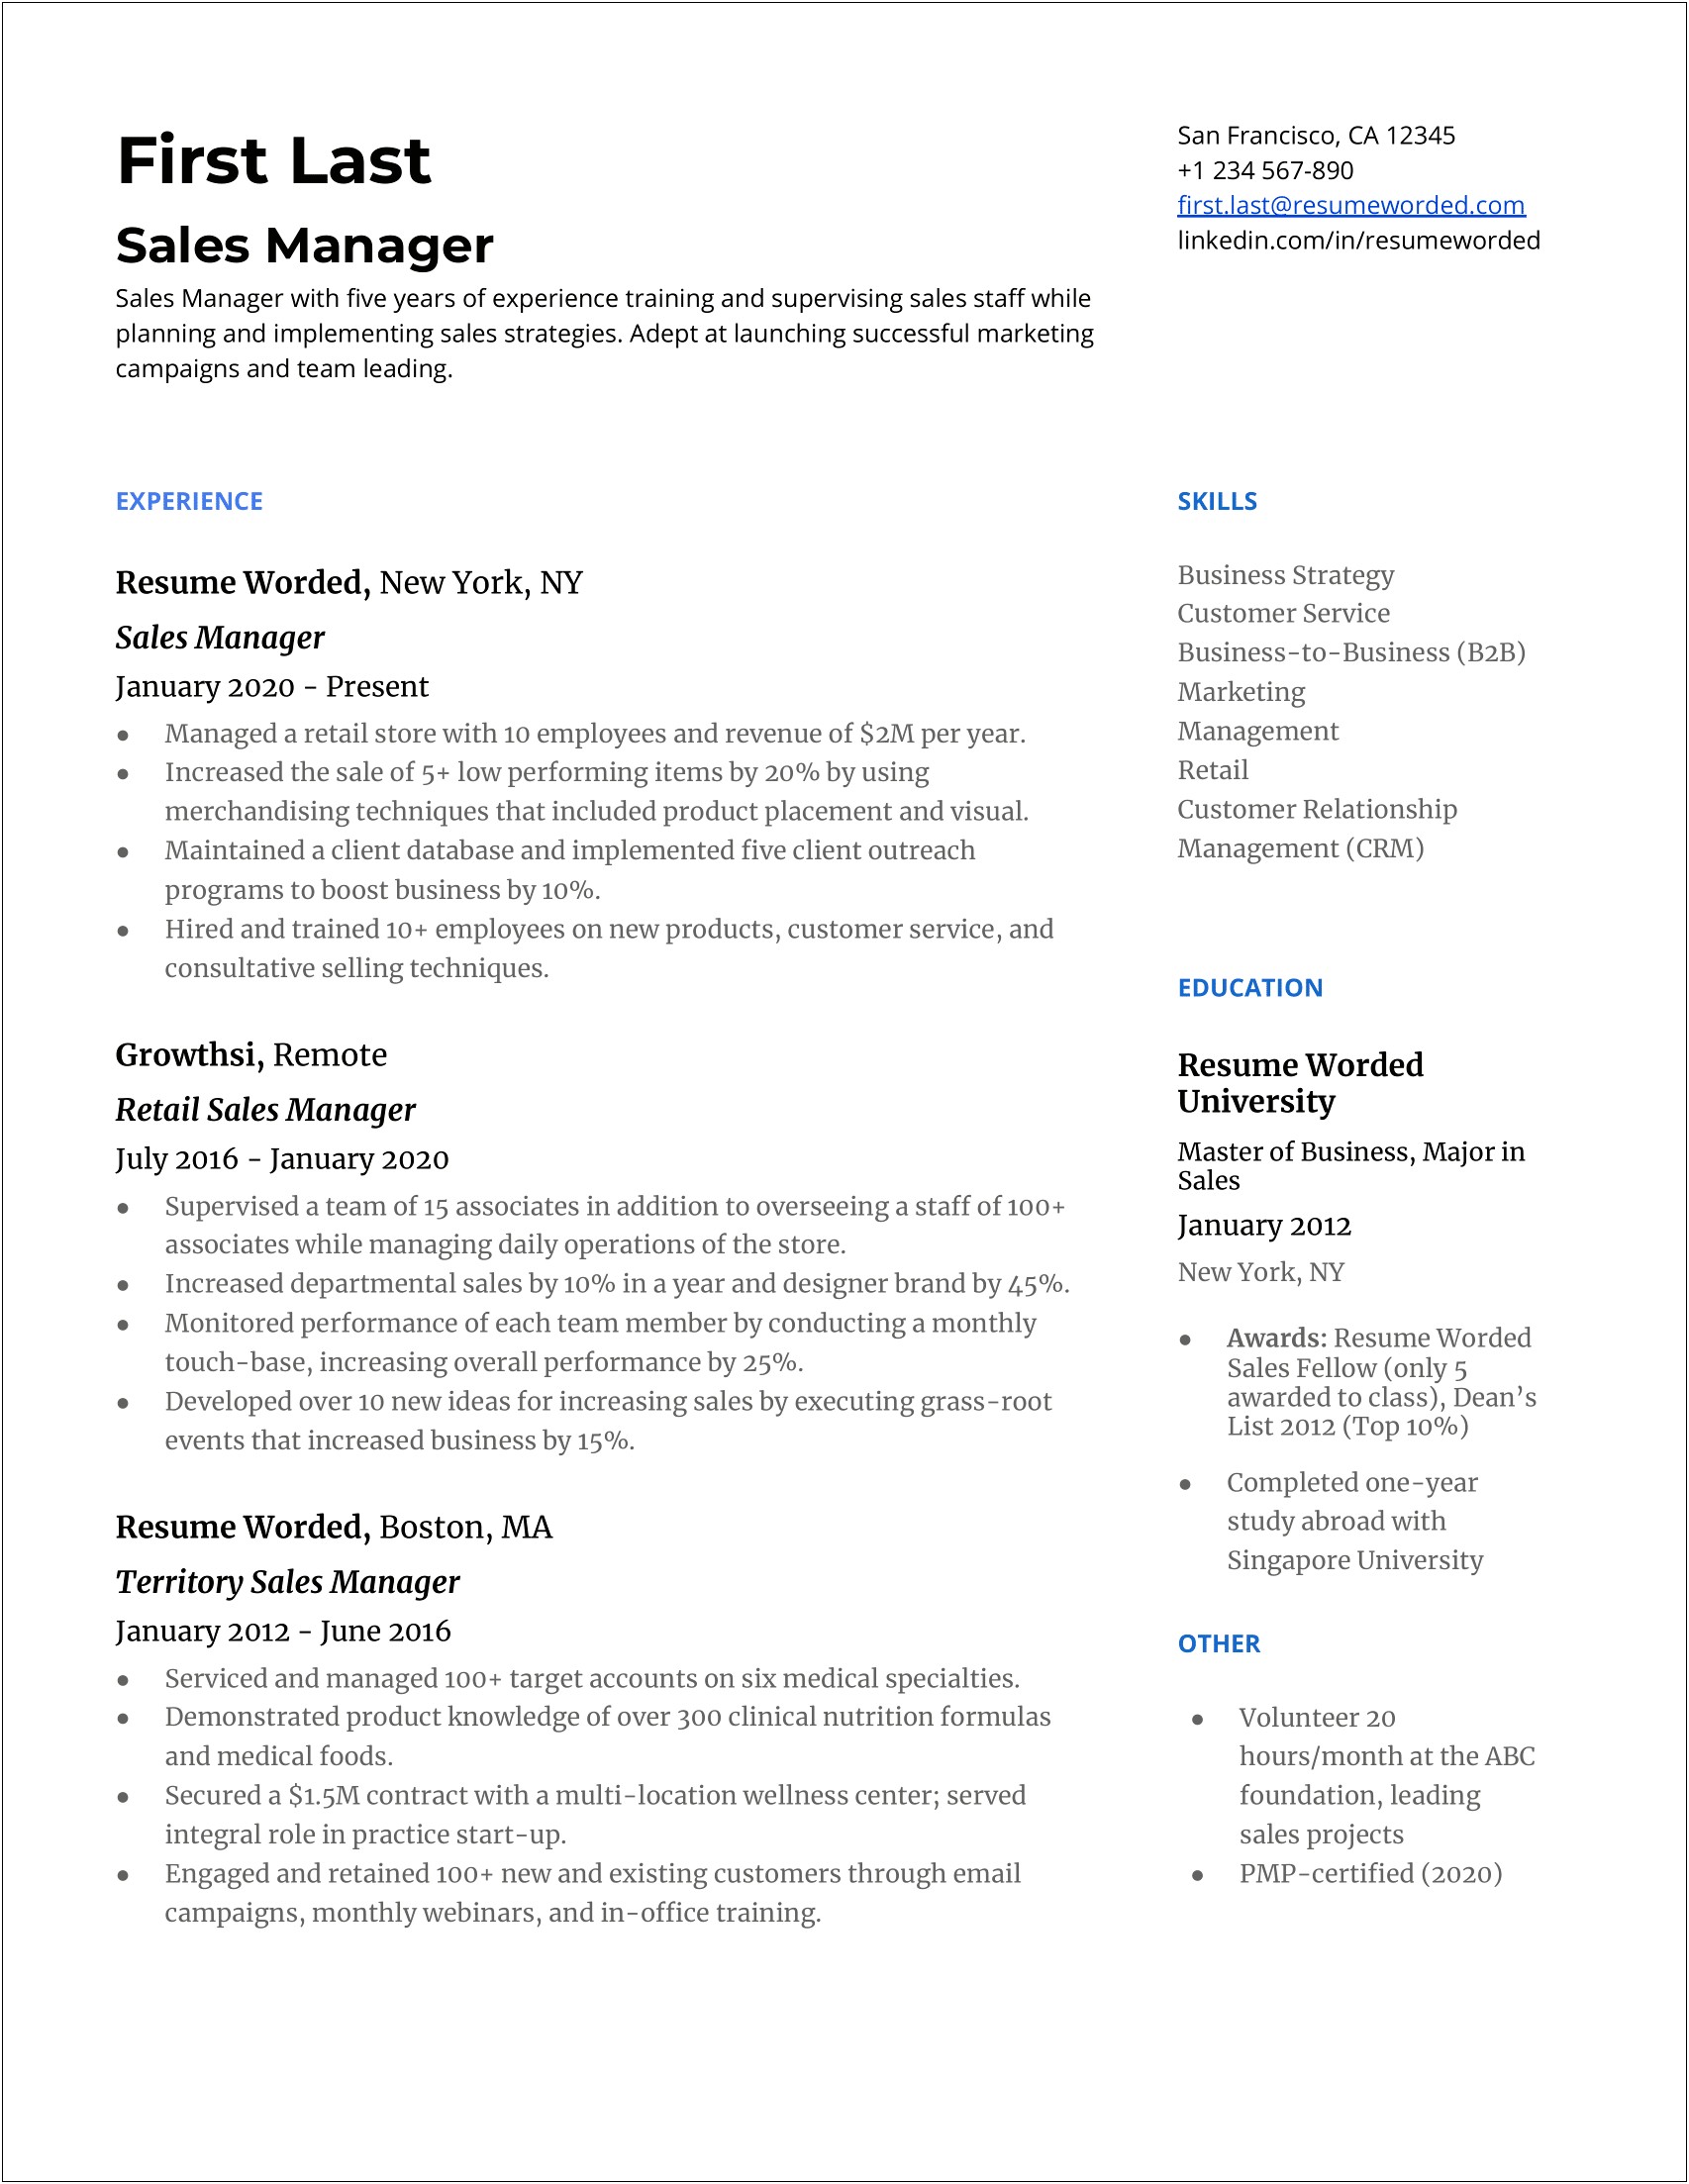 Hiring Manager Salary Negotiation Achievement For Resume